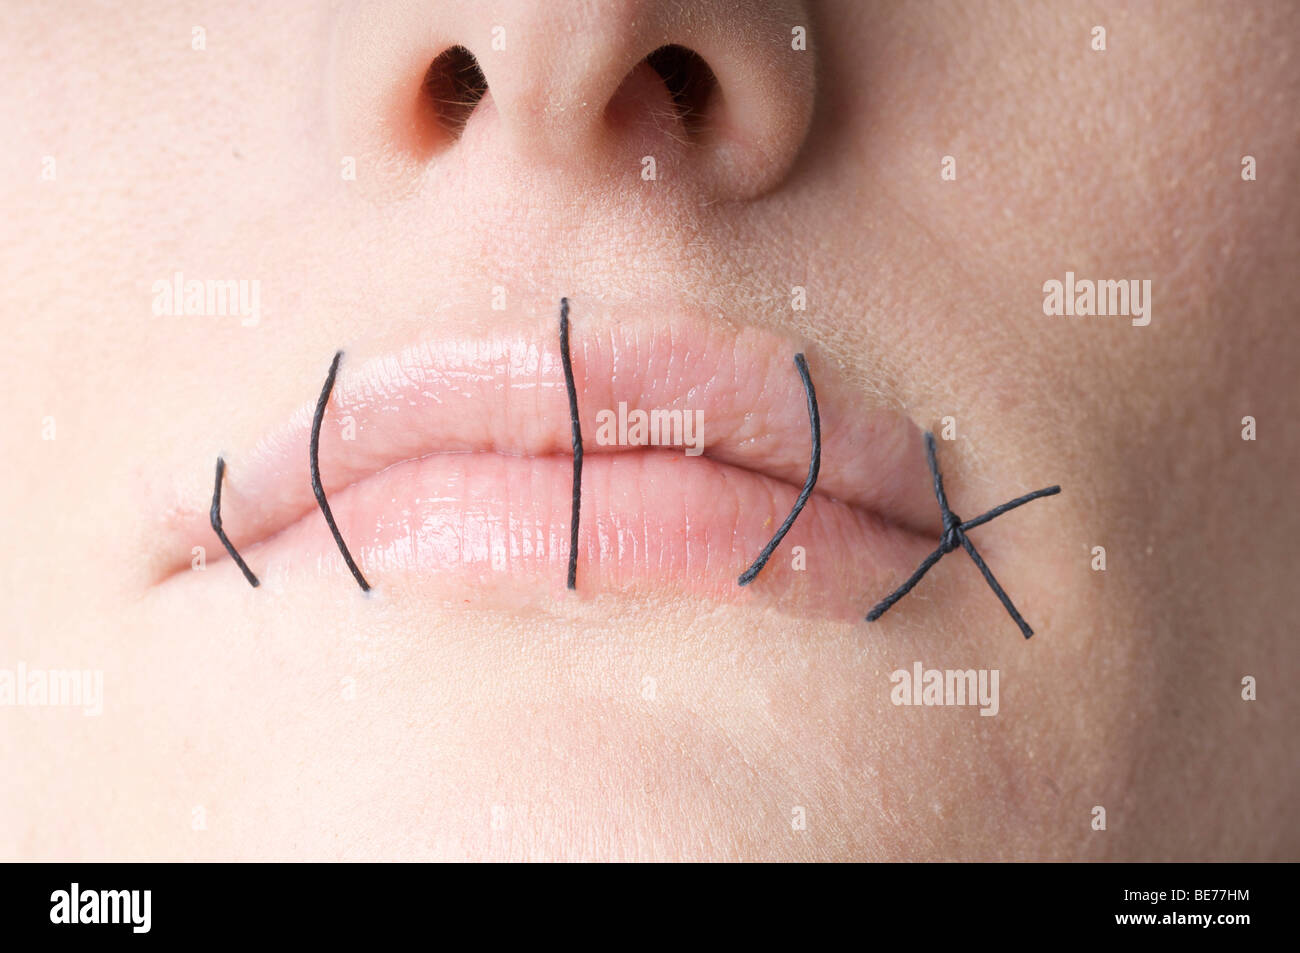 Mouth sewn together Stock Photo